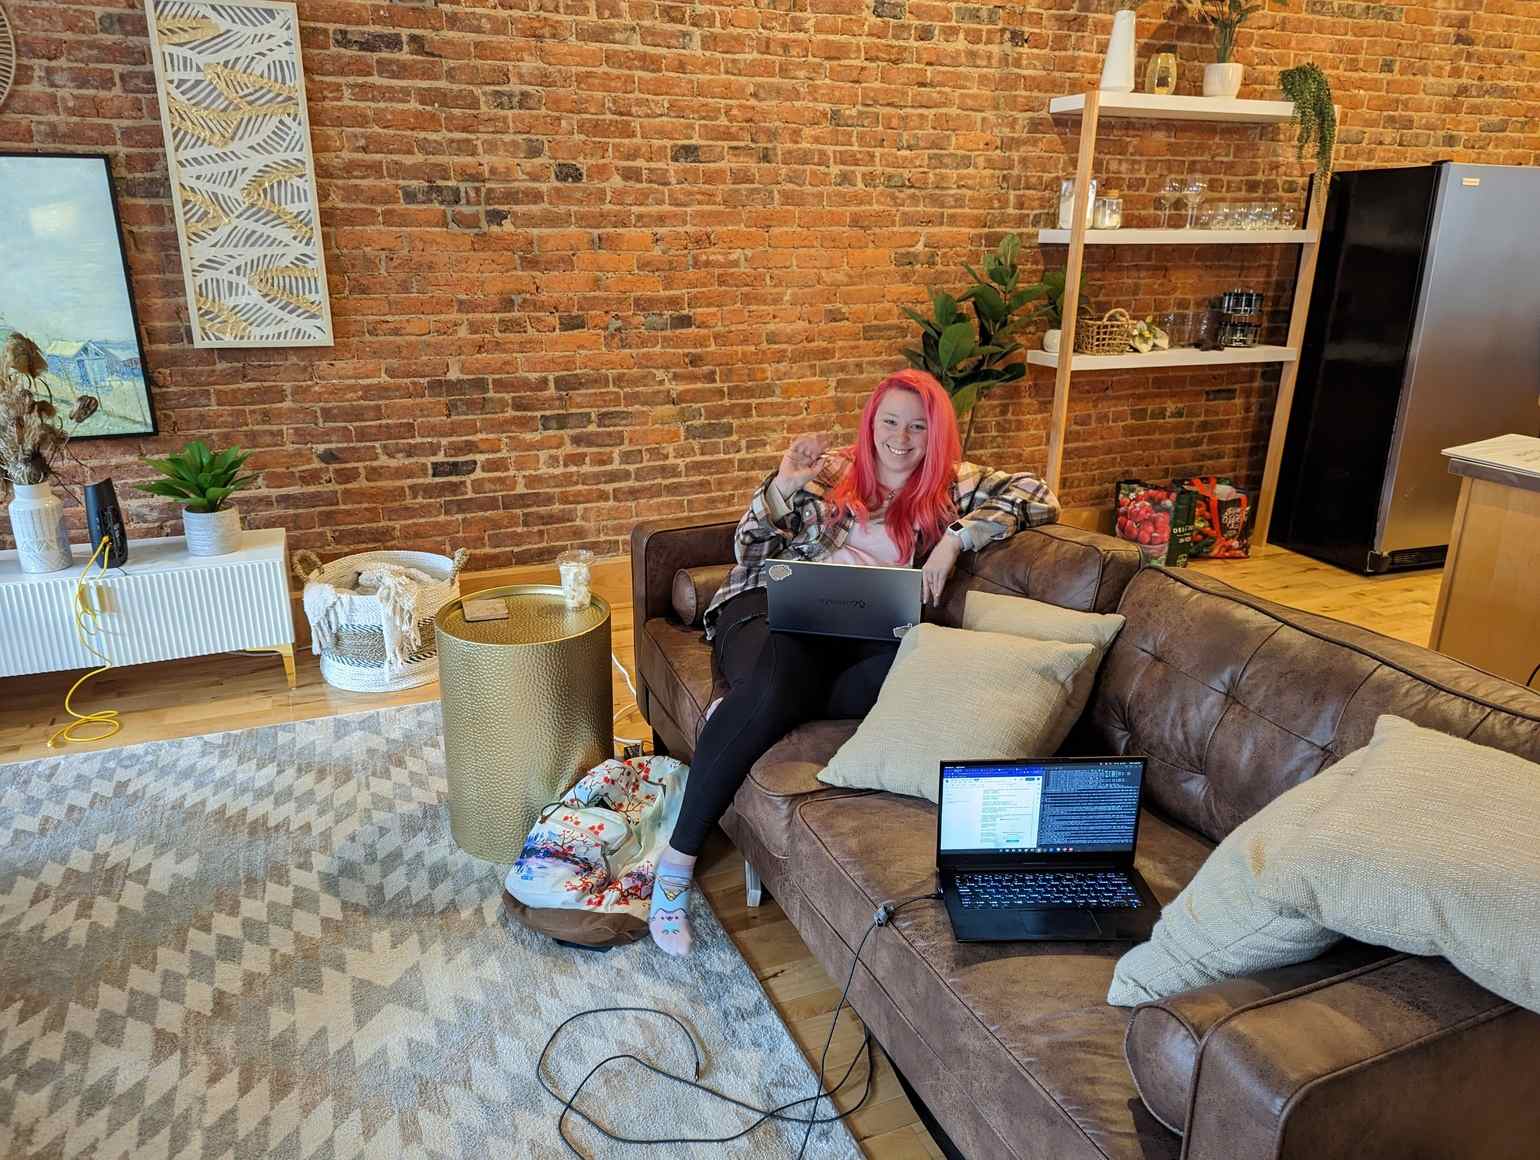 Casablanca. A spacious lounge room with an exposed brick wall, with part of the kitchen visible in the top right. A grey patterned rug sits on the floor. An End Pointer sits on a leather couch with her laptop. Another laptop sits on the couch.